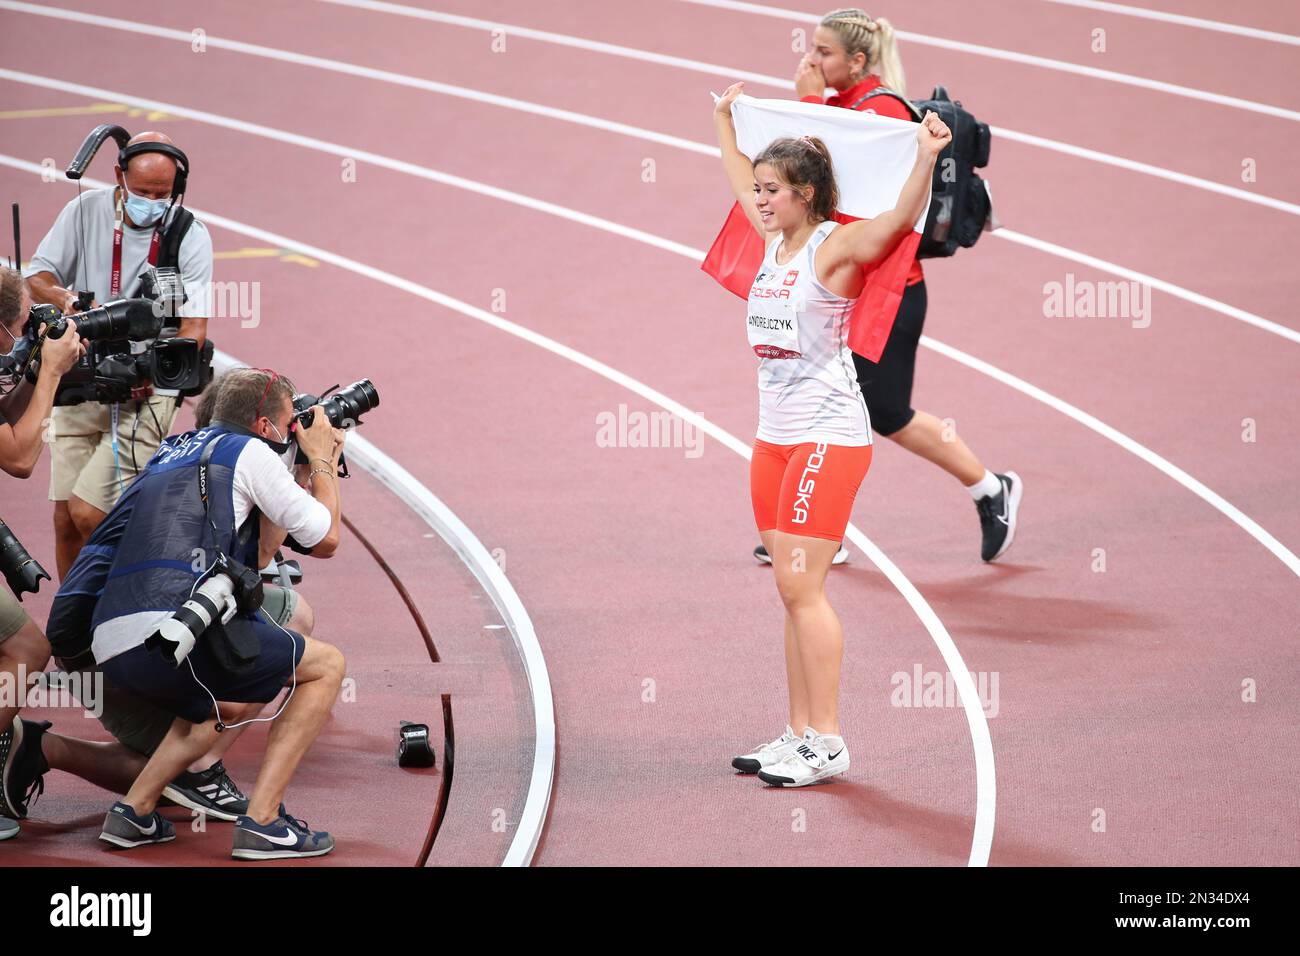 AUG 06, 2021 - Tokyo, Japan: Maria ANDREJCZYK of Poland wins the Silver Medal in the Athletics Women's Javelin Throw Final at the Tokyo 2020 Olympic G Stock Photo